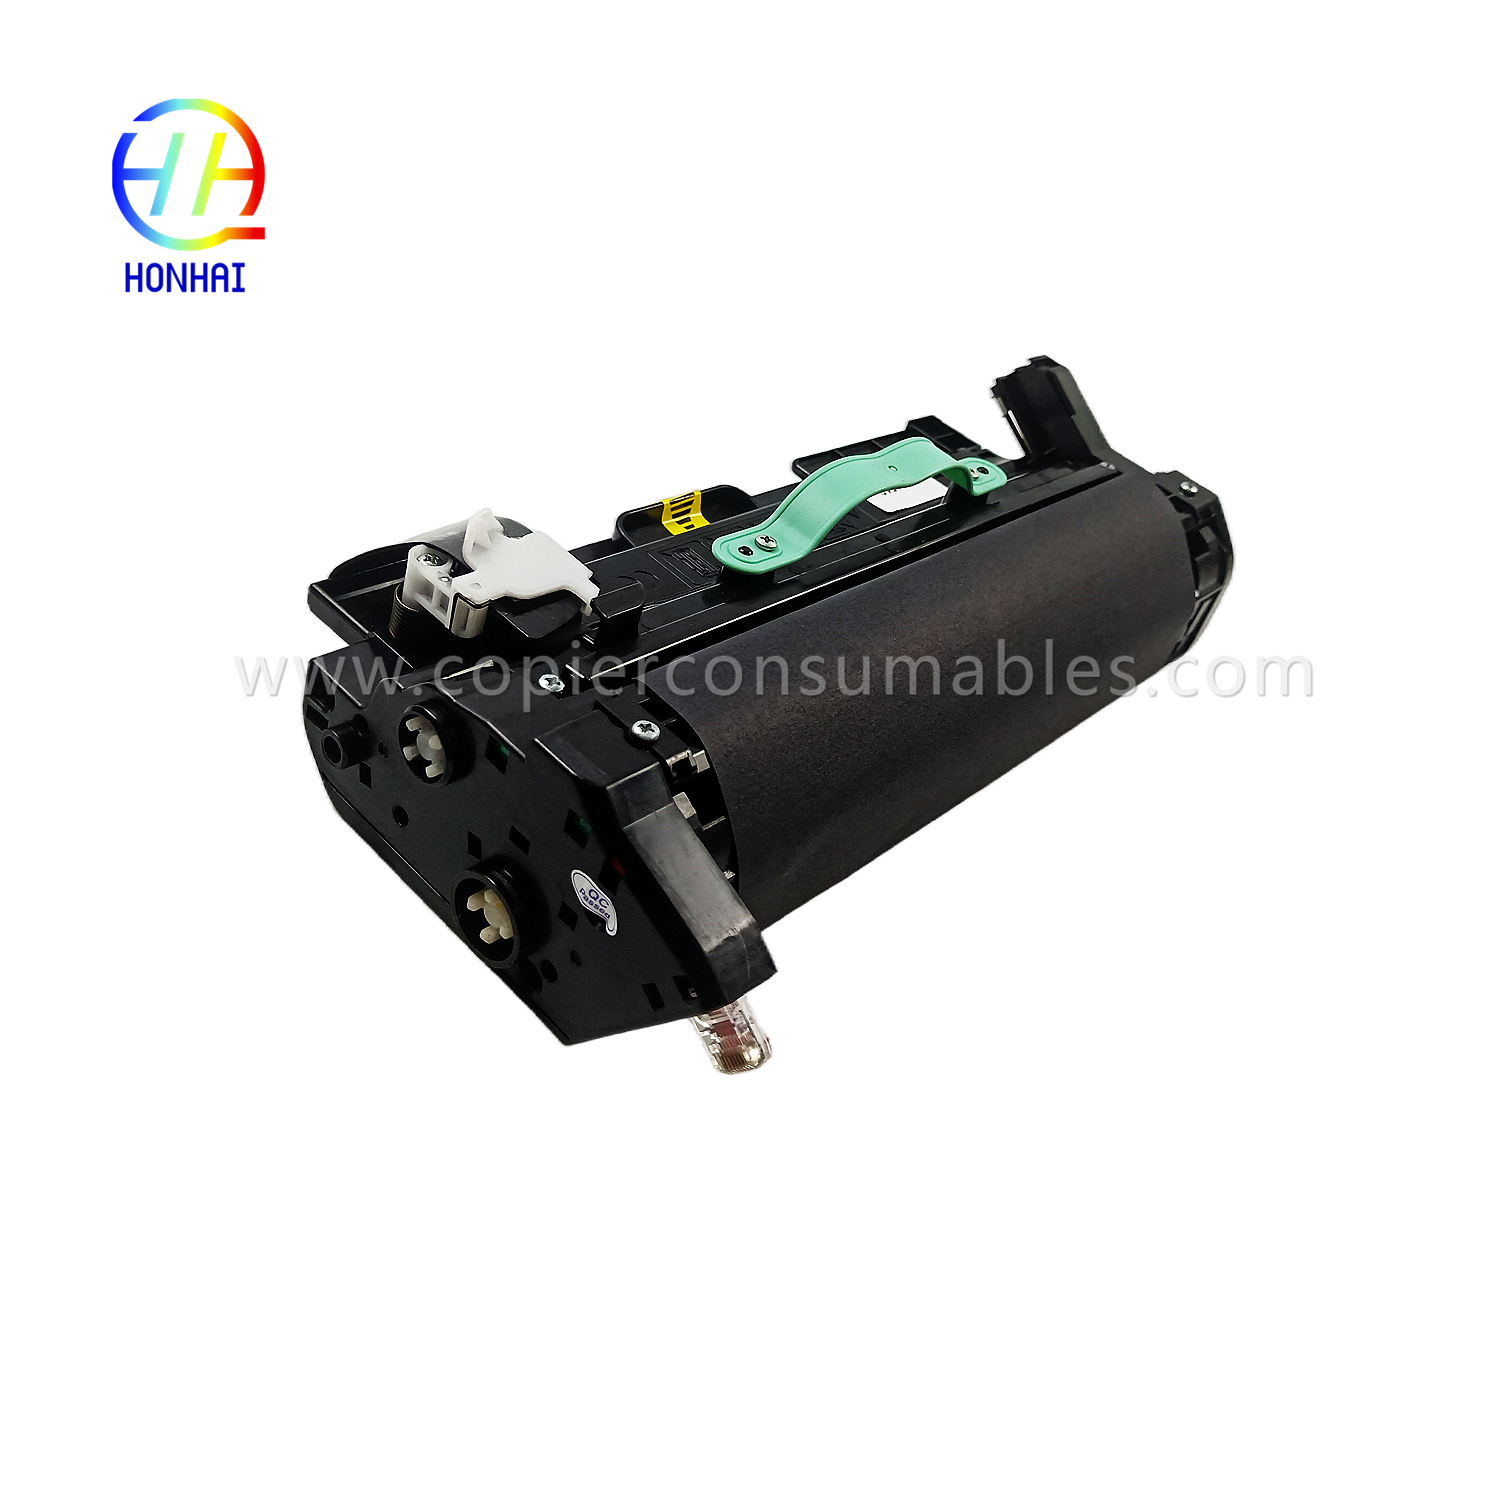 https://www.copierconsumables.com/fuser-unit-for-samsung-ml-4510-ml4512-ml-4510nd-ml-4512nd-ml-4510-ml-4512-jc91-01028a-fusing-assembly-2-product/